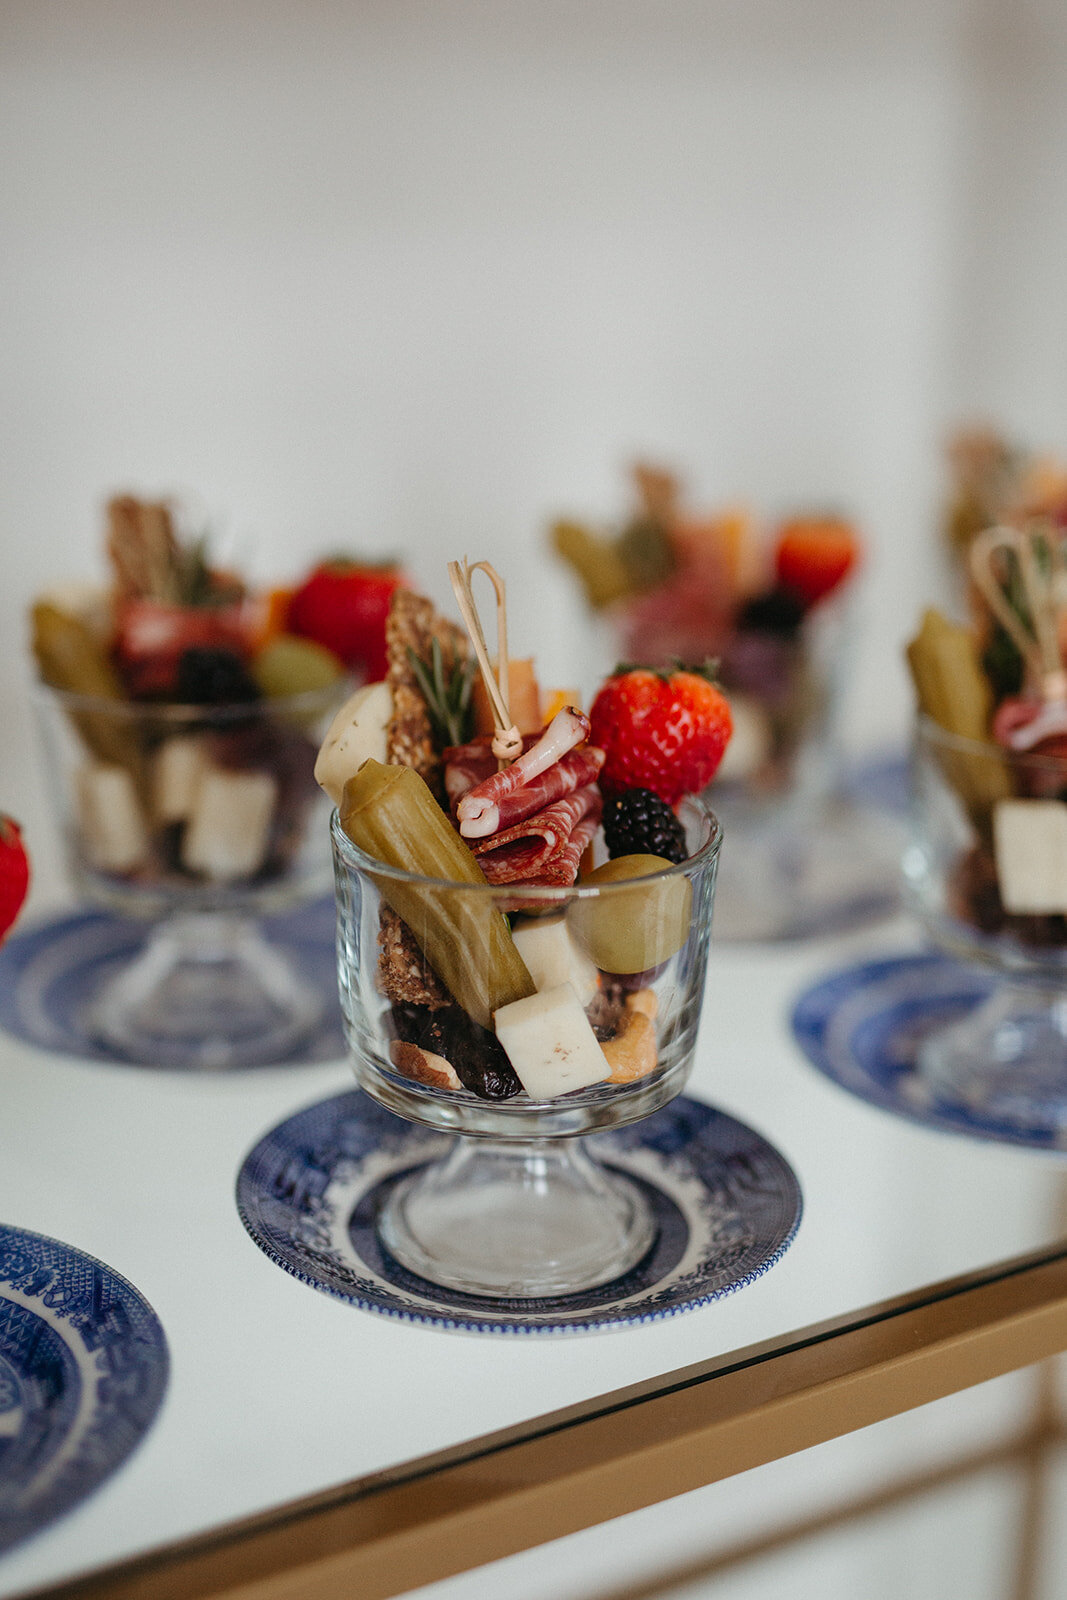 Charcuterie hors d’oeuvres in a glass cup atop blue and white plates set on a counter.